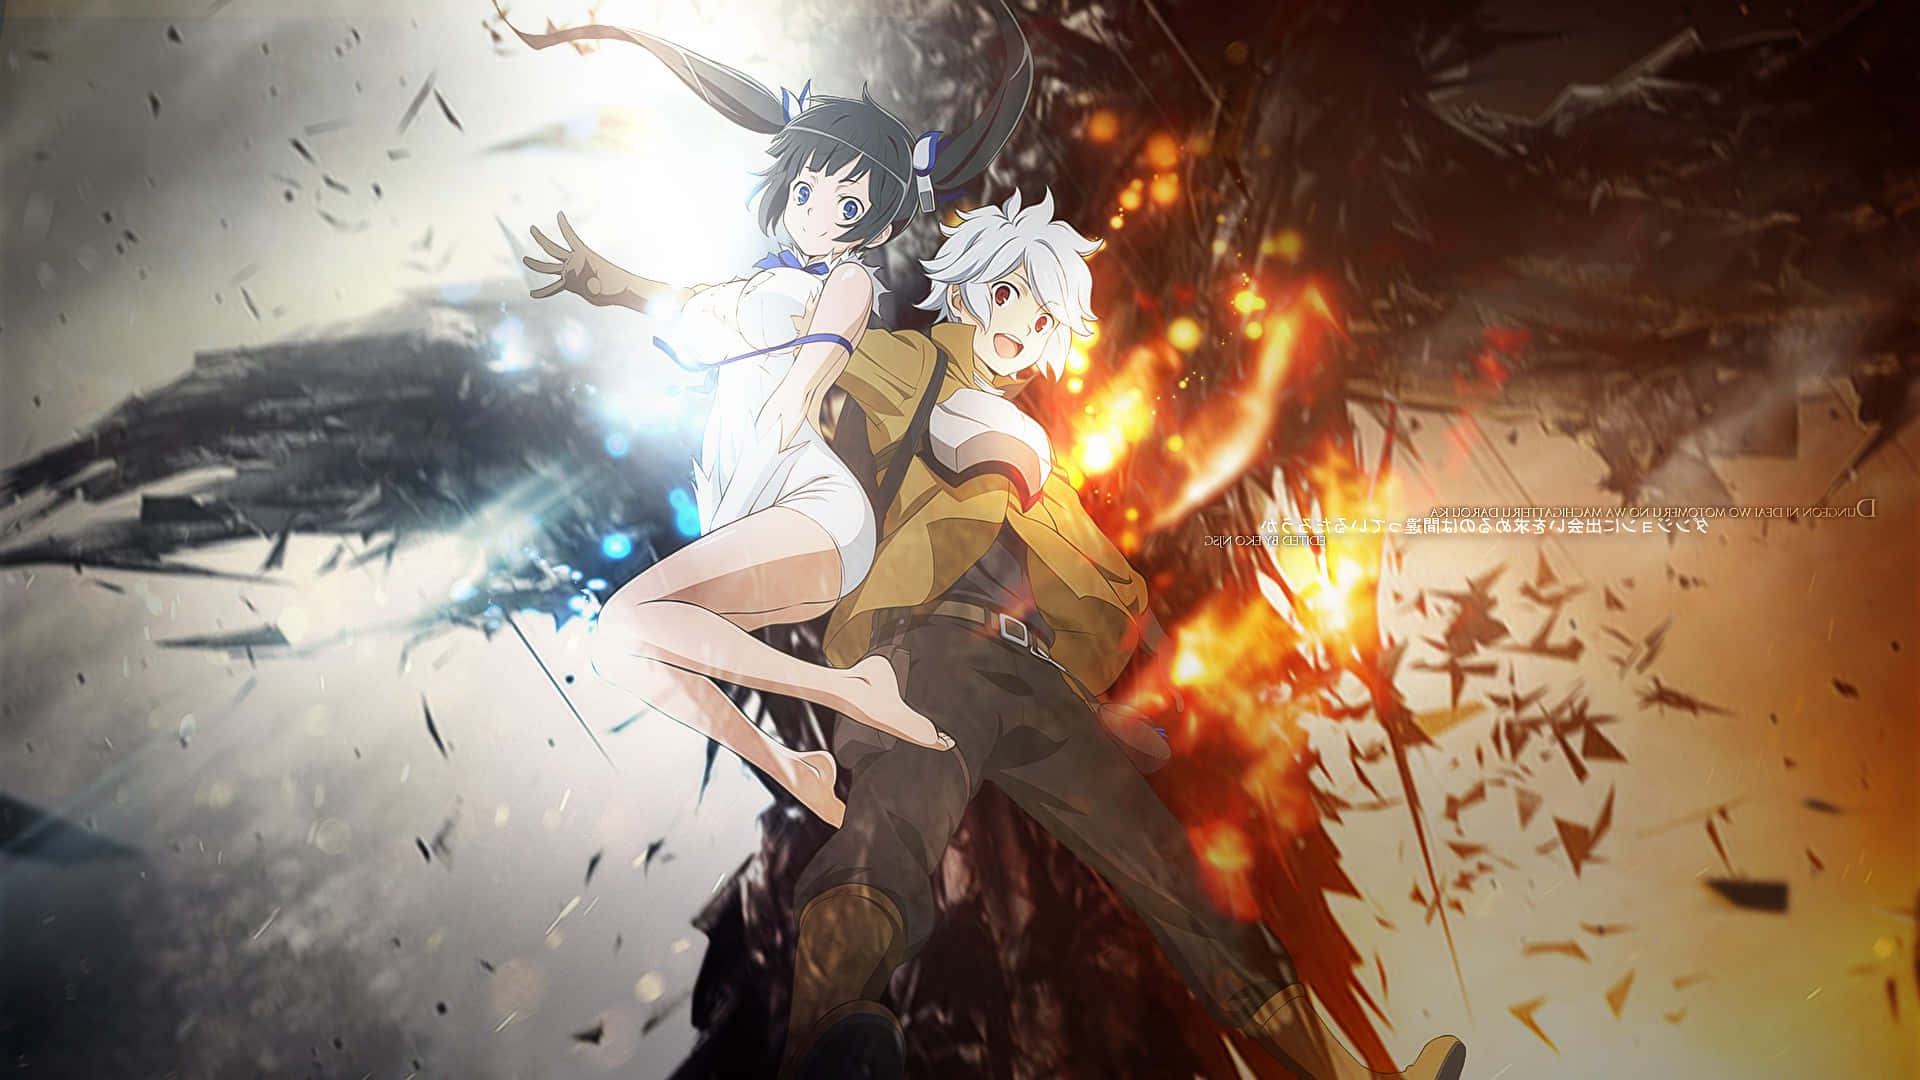 Download “The Beauty and Passion of Anime Fire” Wallpaper